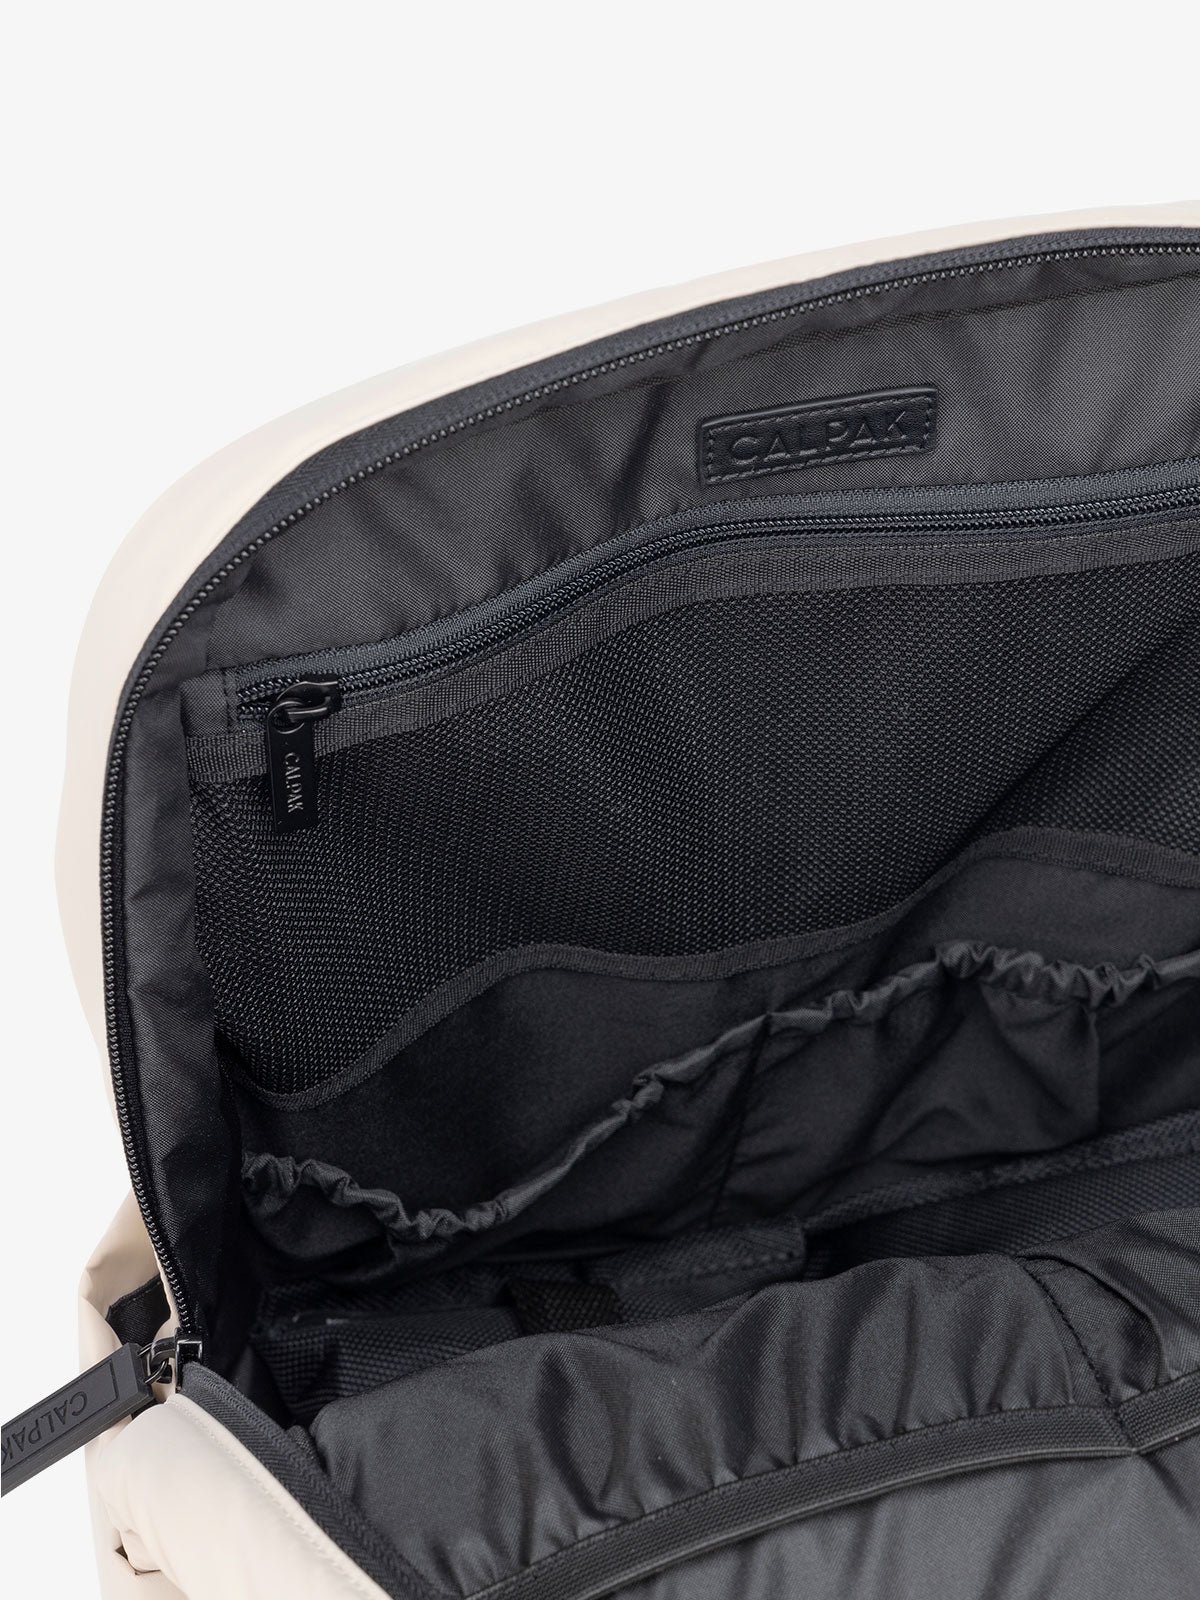 interior of backpack with laptop sleeve